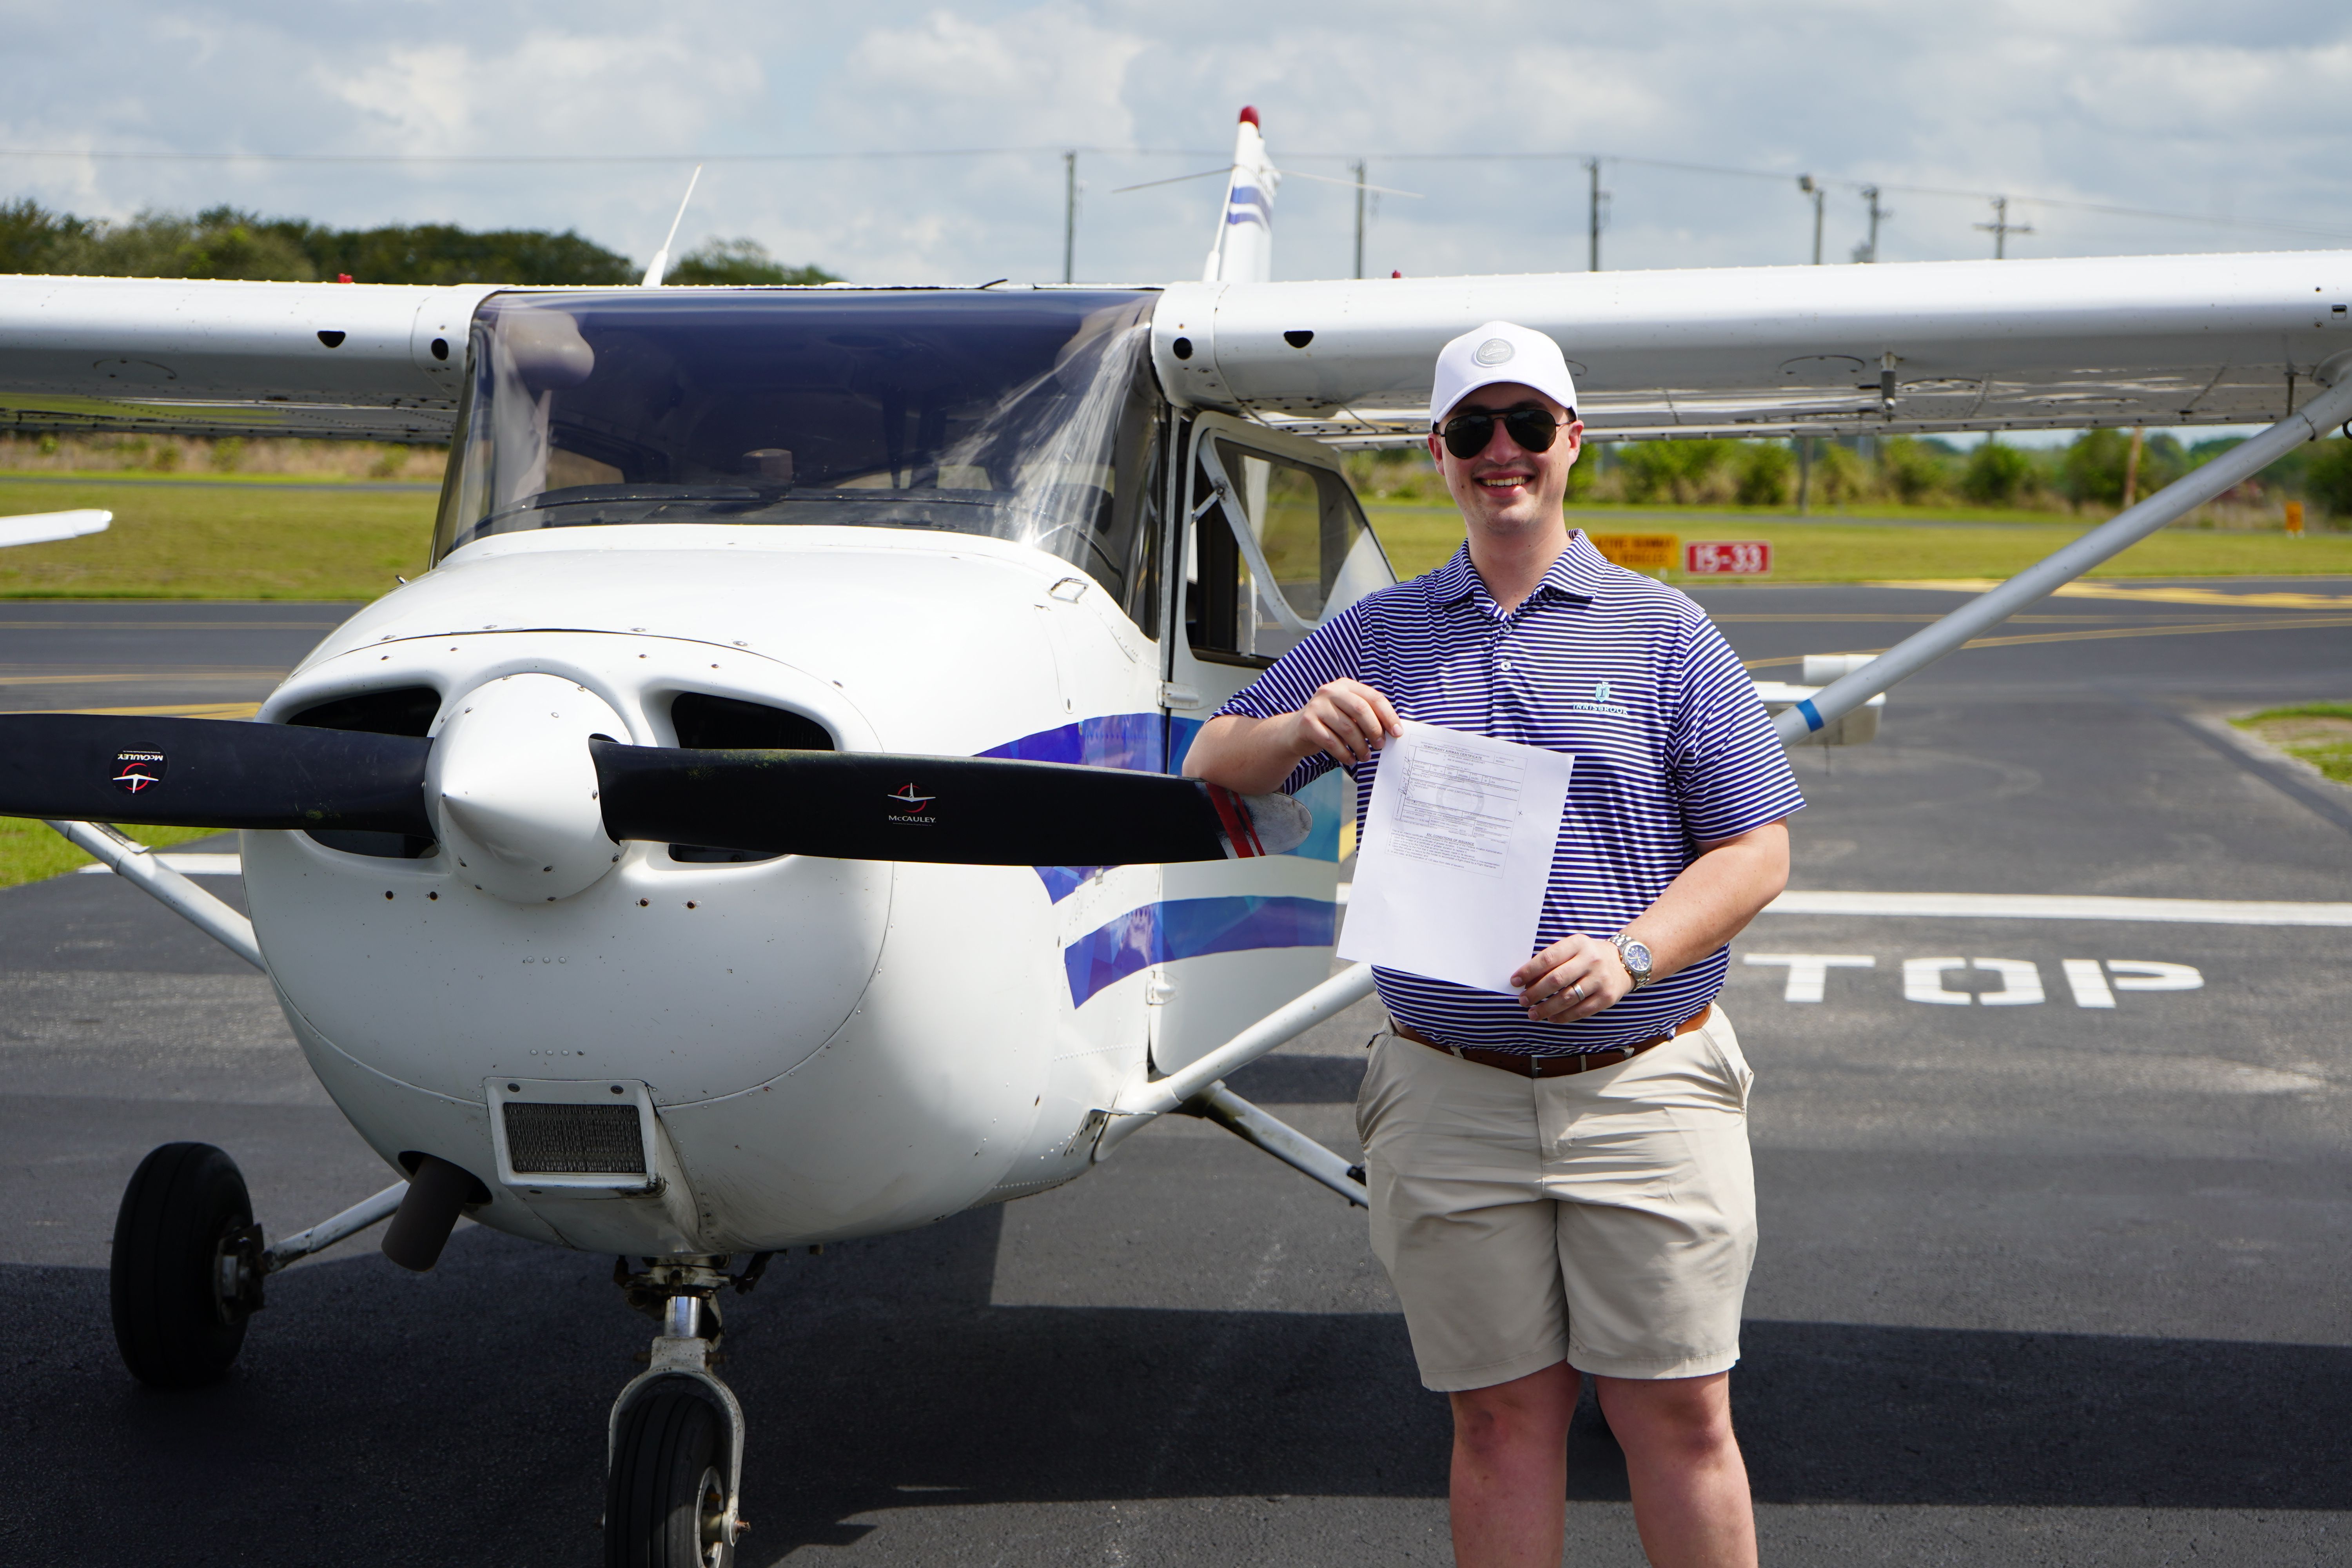 Student pilot with temporary airman certificate